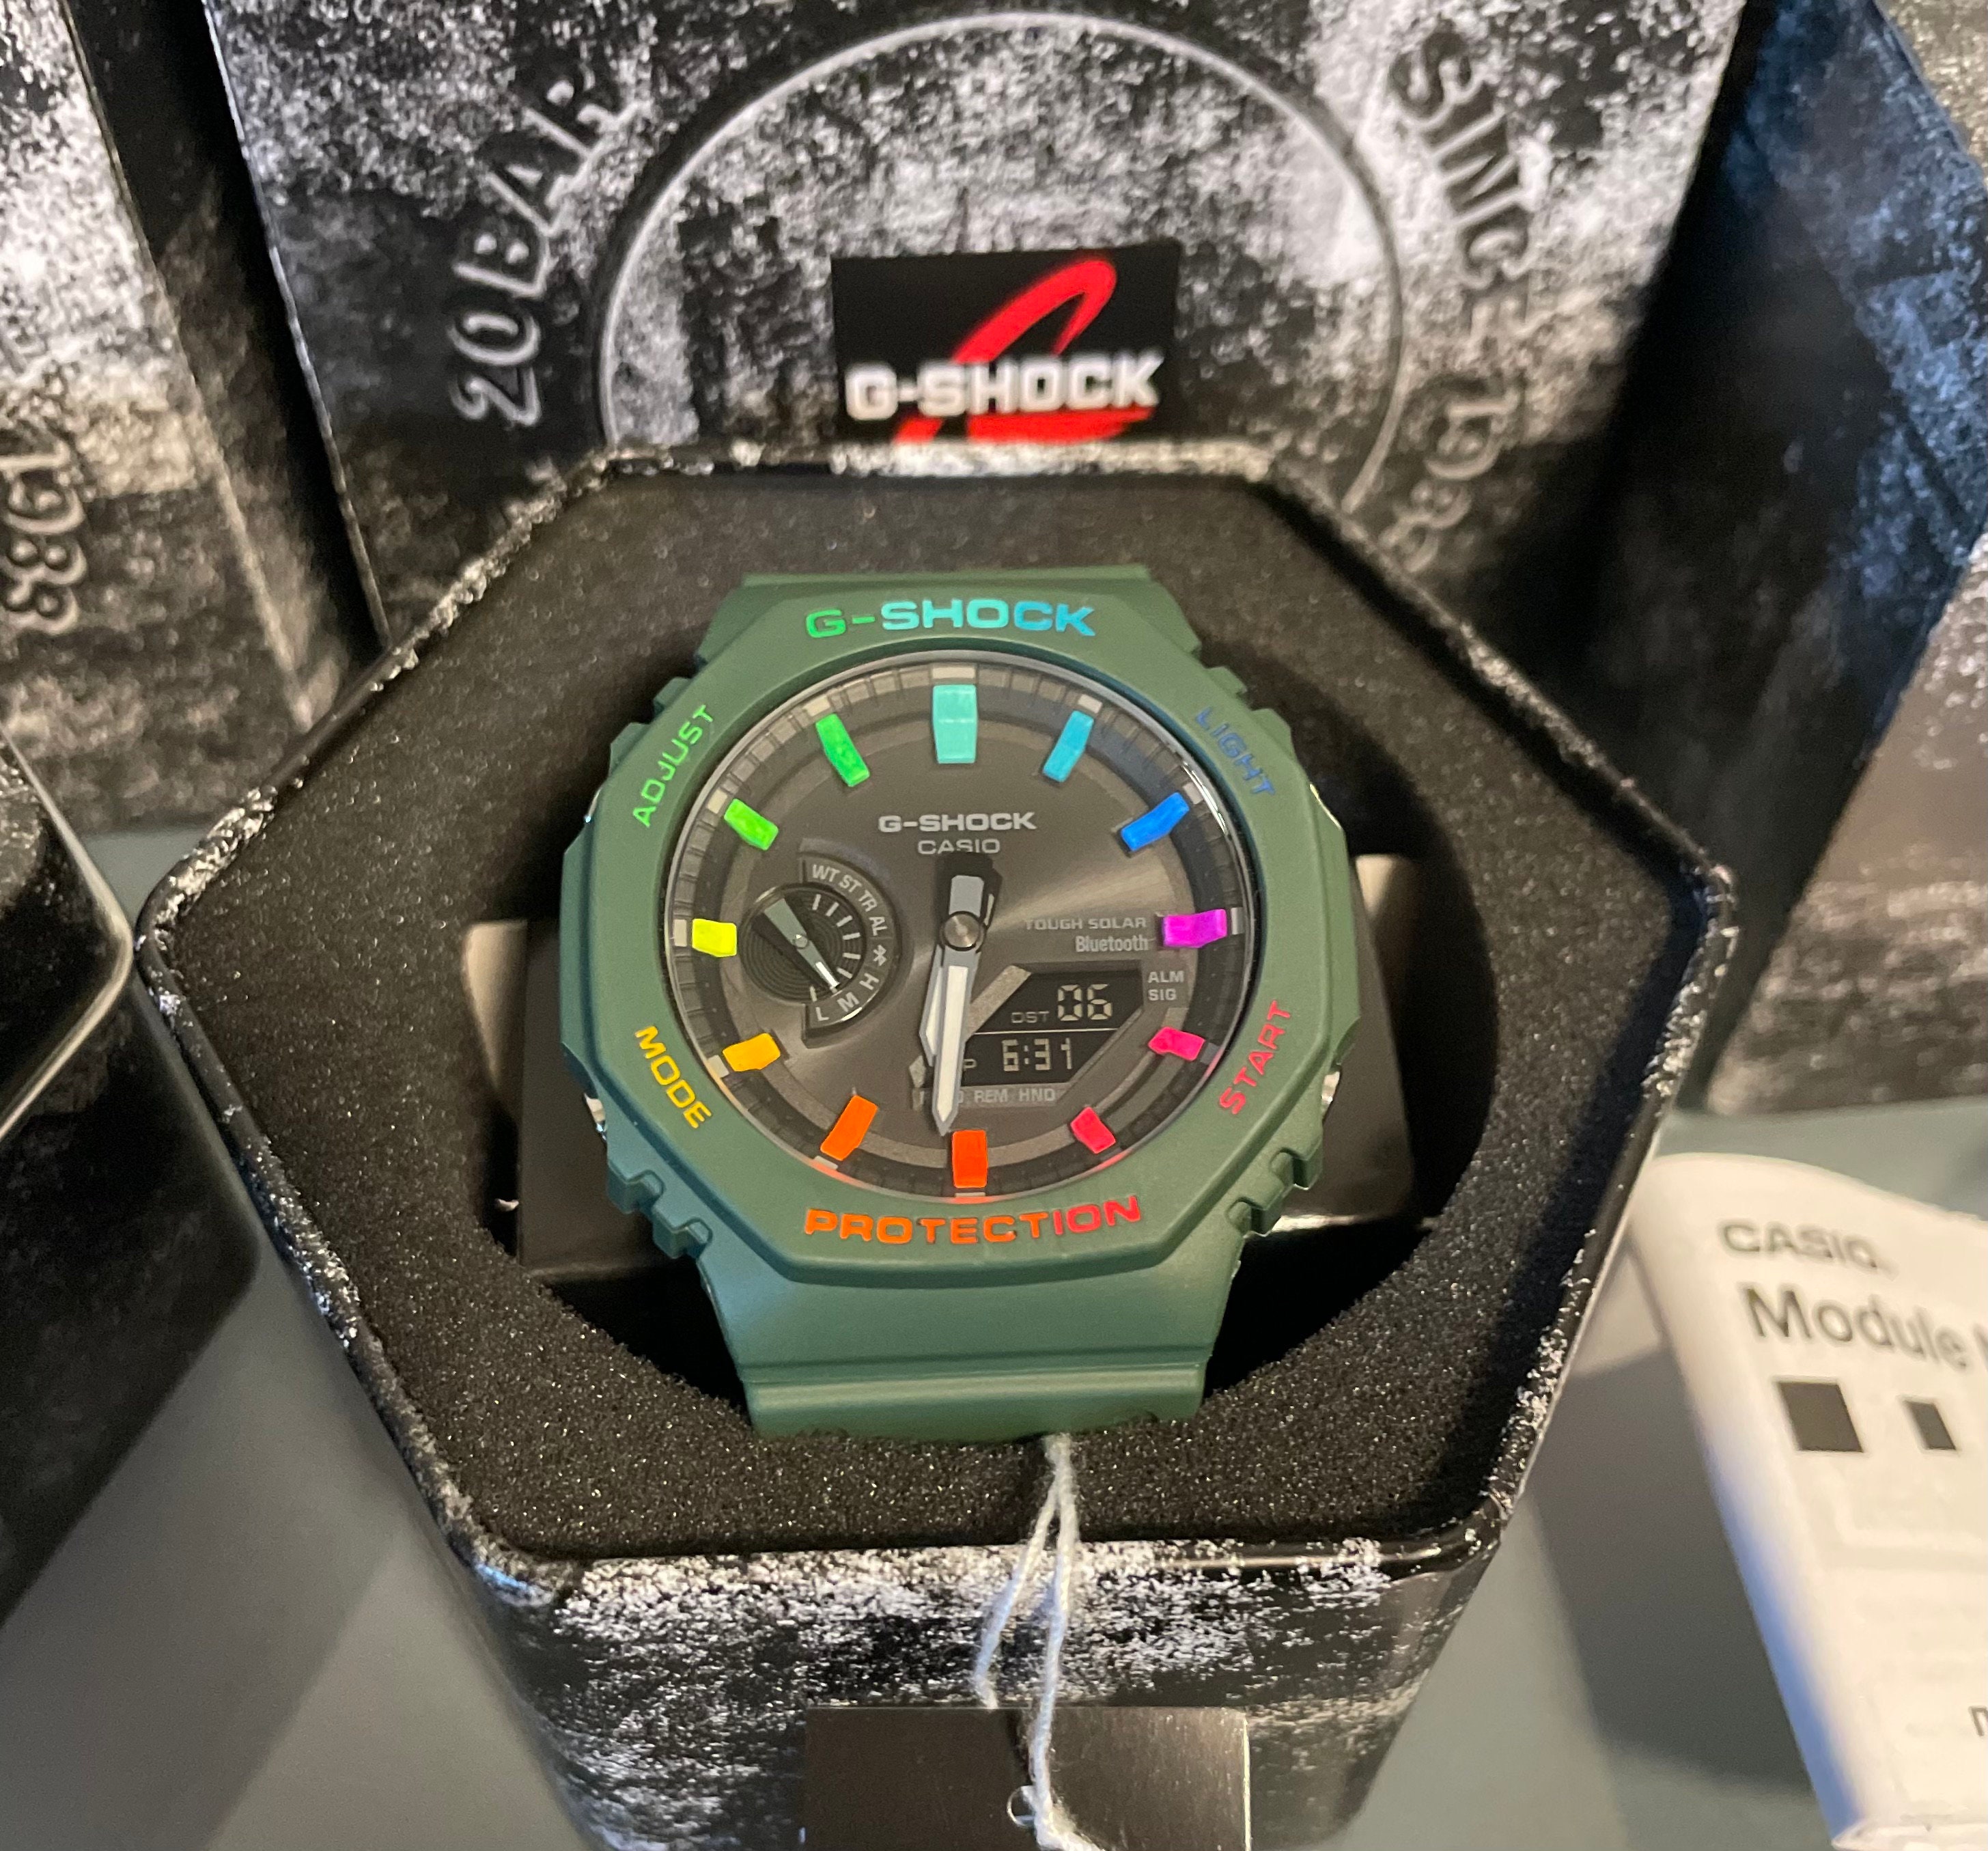 Limited Edition Hand-Painted Casio G-Shock Casioak - Etsy 日本